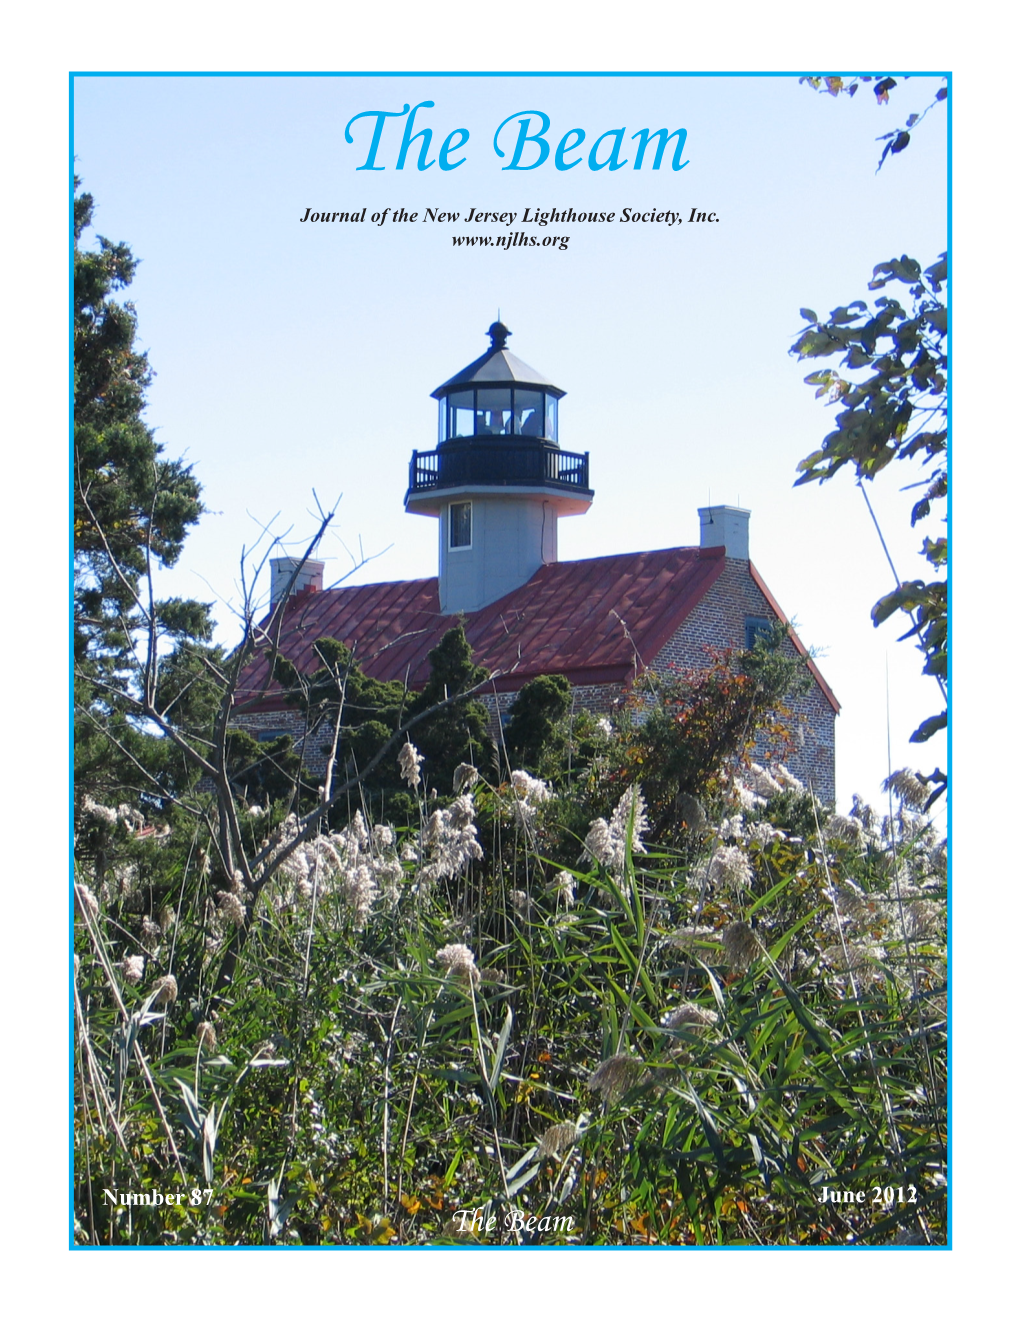 The Beam Journal of the New Jersey Lighthouse Society, Inc